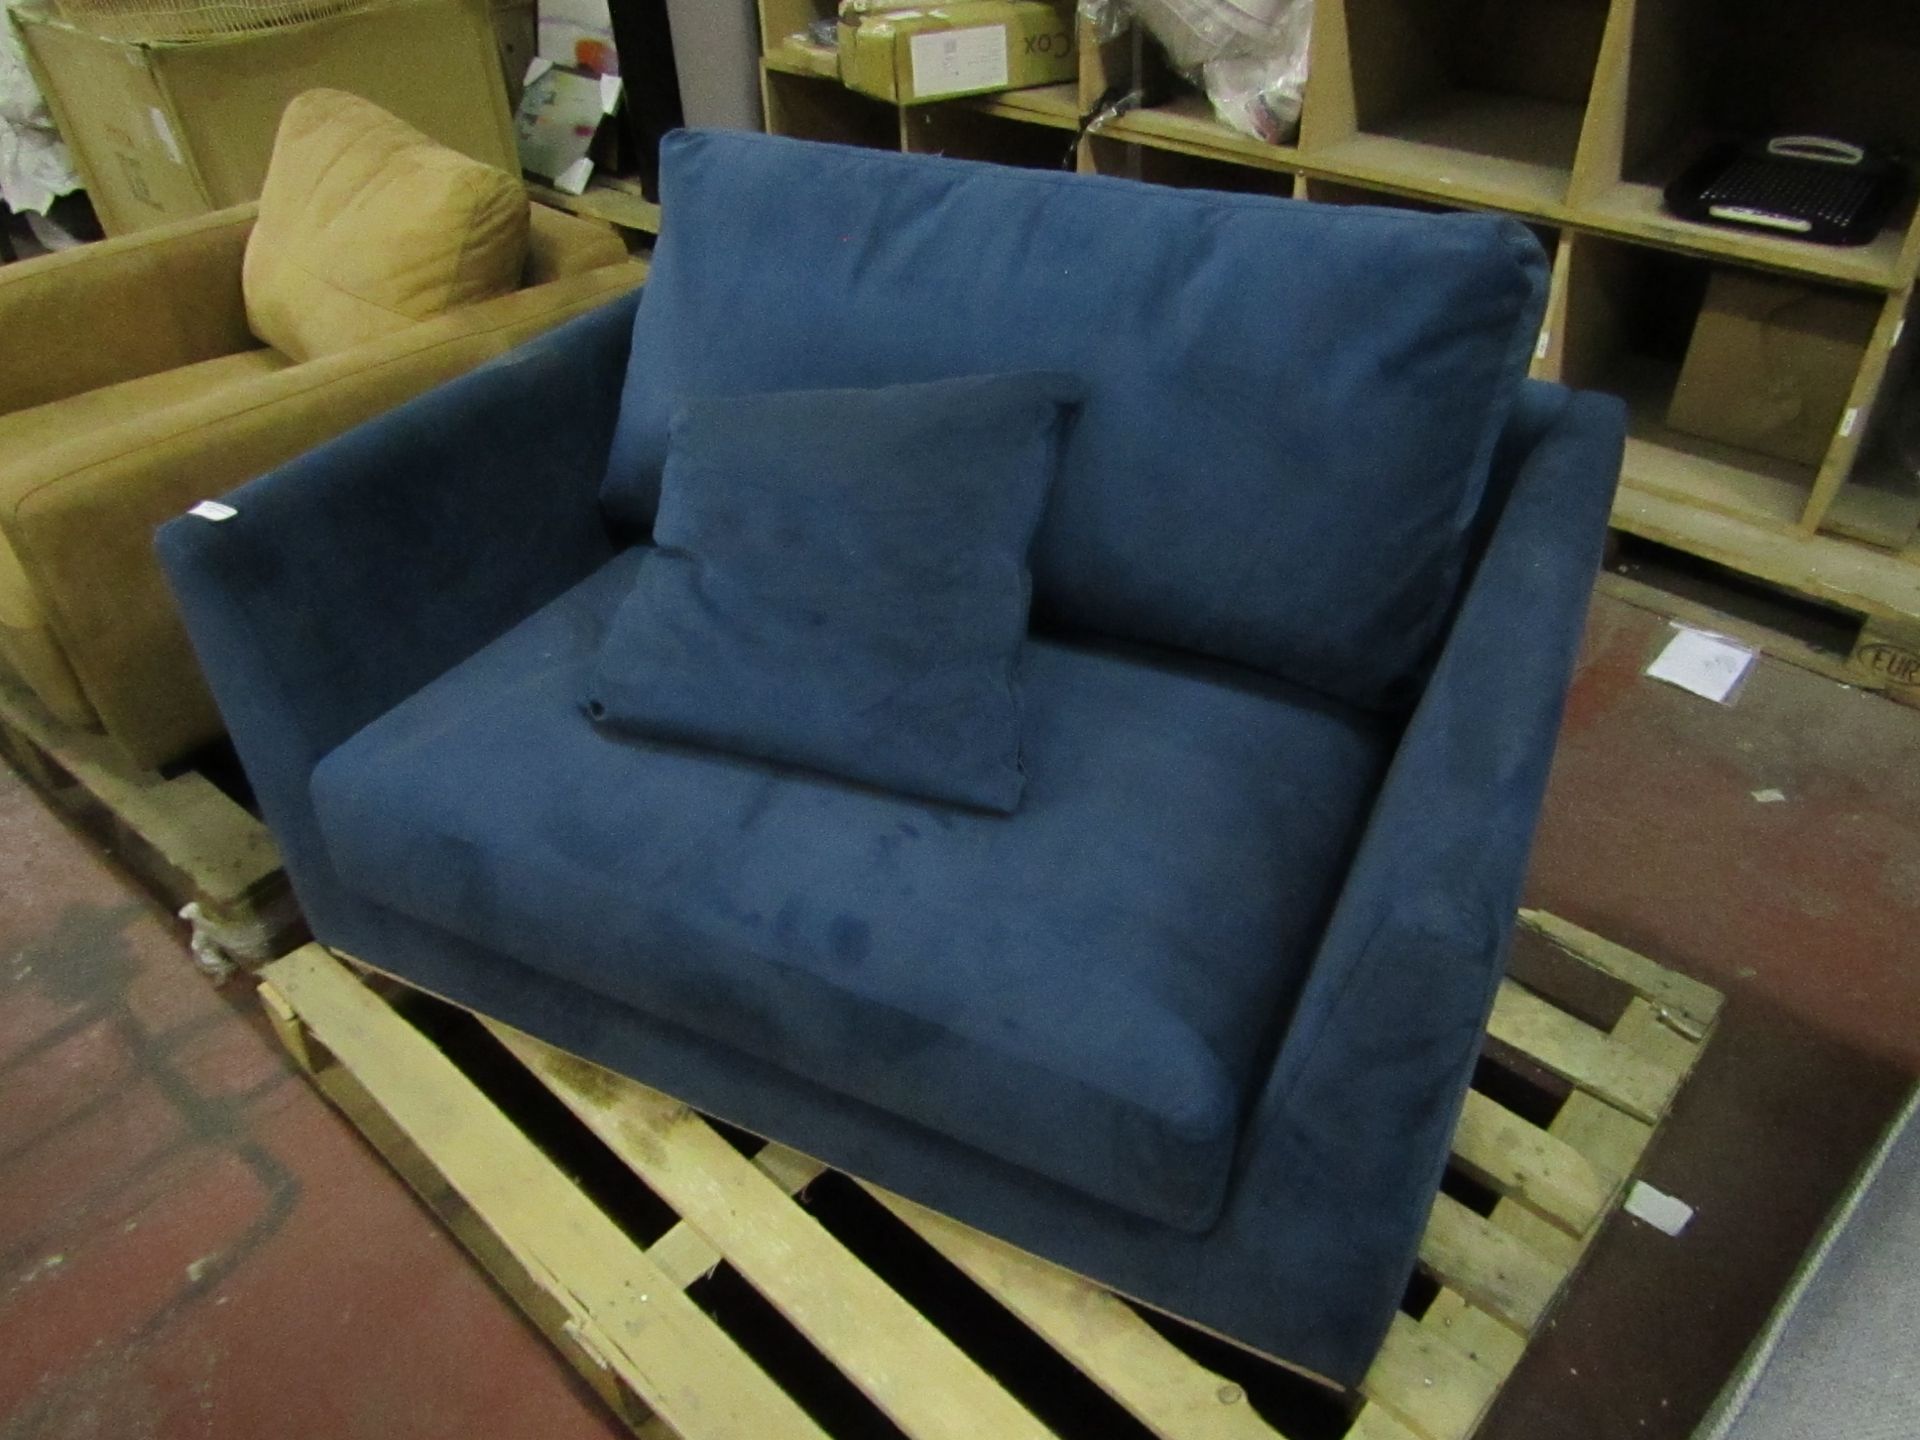 | 1X | MADE.COM BLUE VELVET ARMCHAIR | NO MAJOR DAMAGE (PLEASE NOTE, THIS DOES NOT PROVIDE ANY